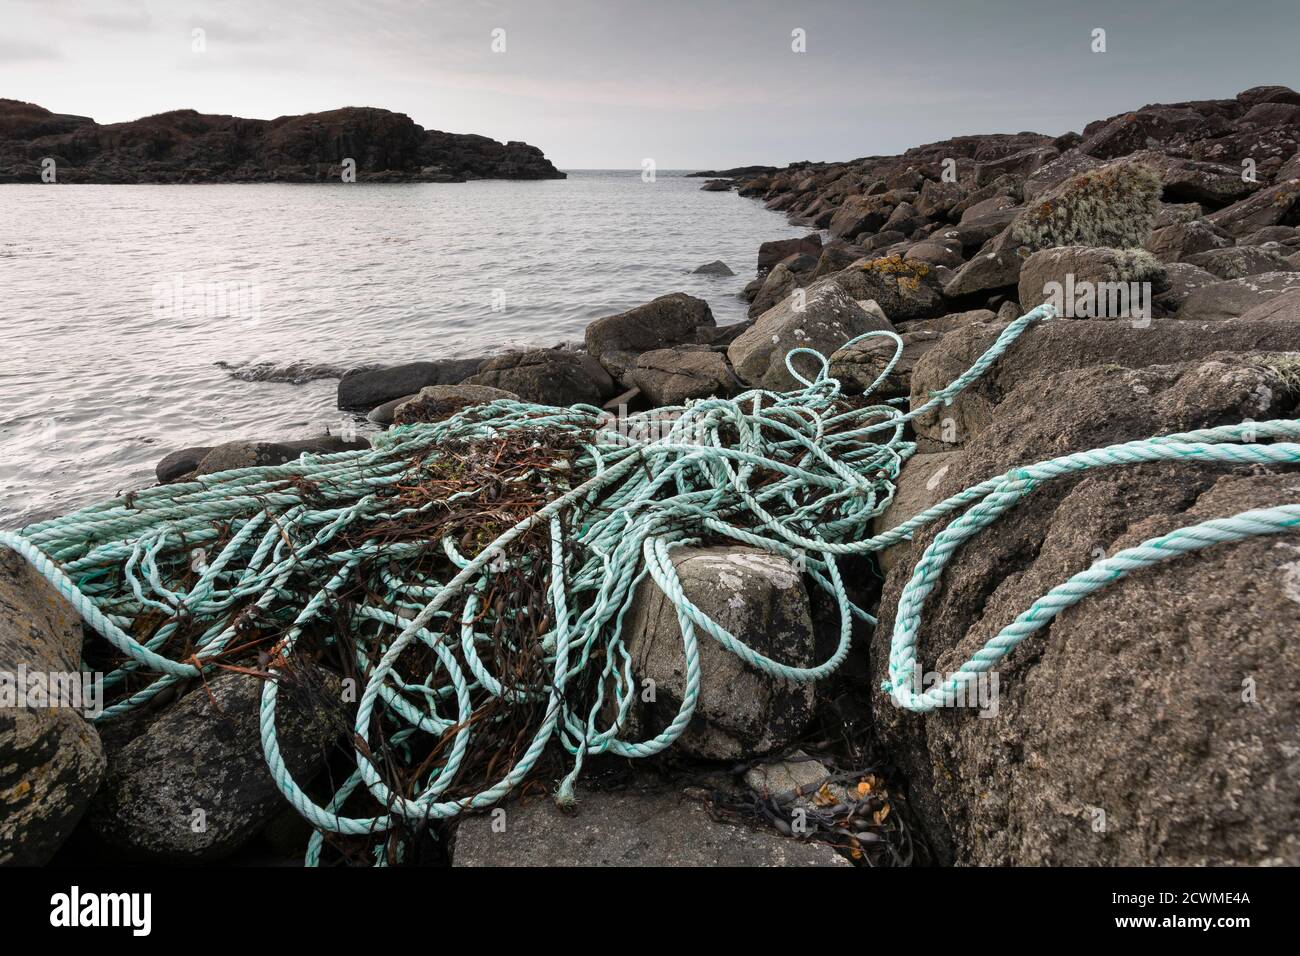 https://c8.alamy.com/comp/2CWME4A/debris-from-fishing-industry-washed-up-on-rocks-nylon-and-plastic-rope-and-netting-is-a-major-problem-around-all-shorelines-of-the-planet-2CWME4A.jpg